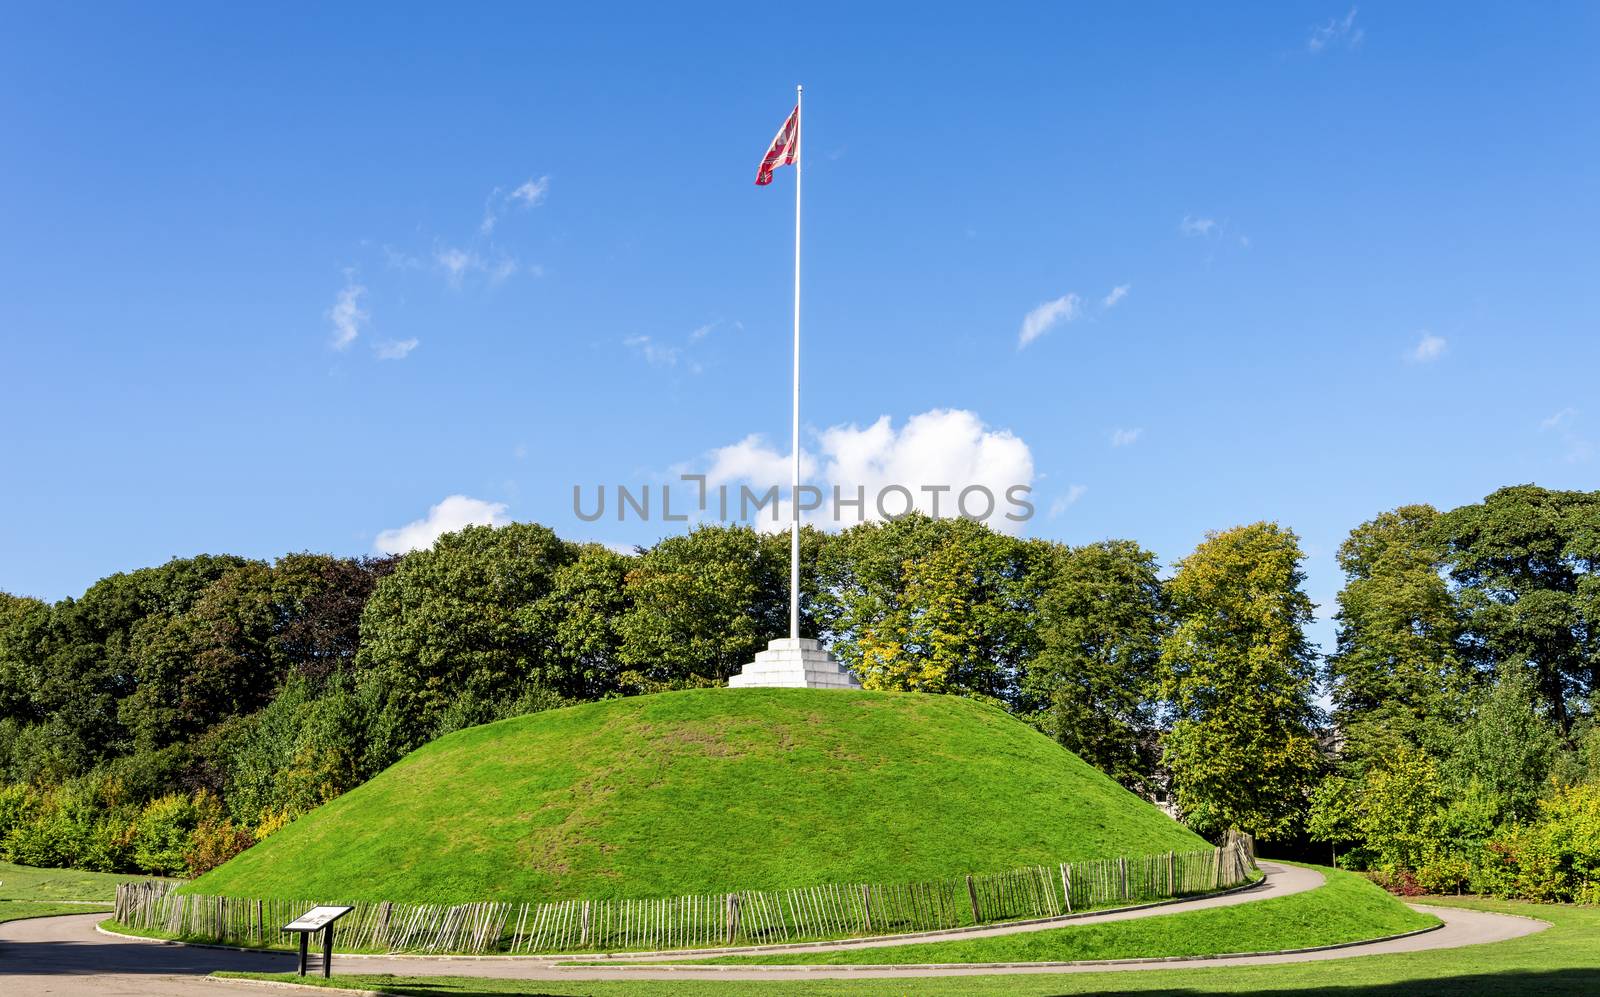 A tall flagpole on top of the Mound in Duthie park, Aberdeen, Scotland by anastasstyles